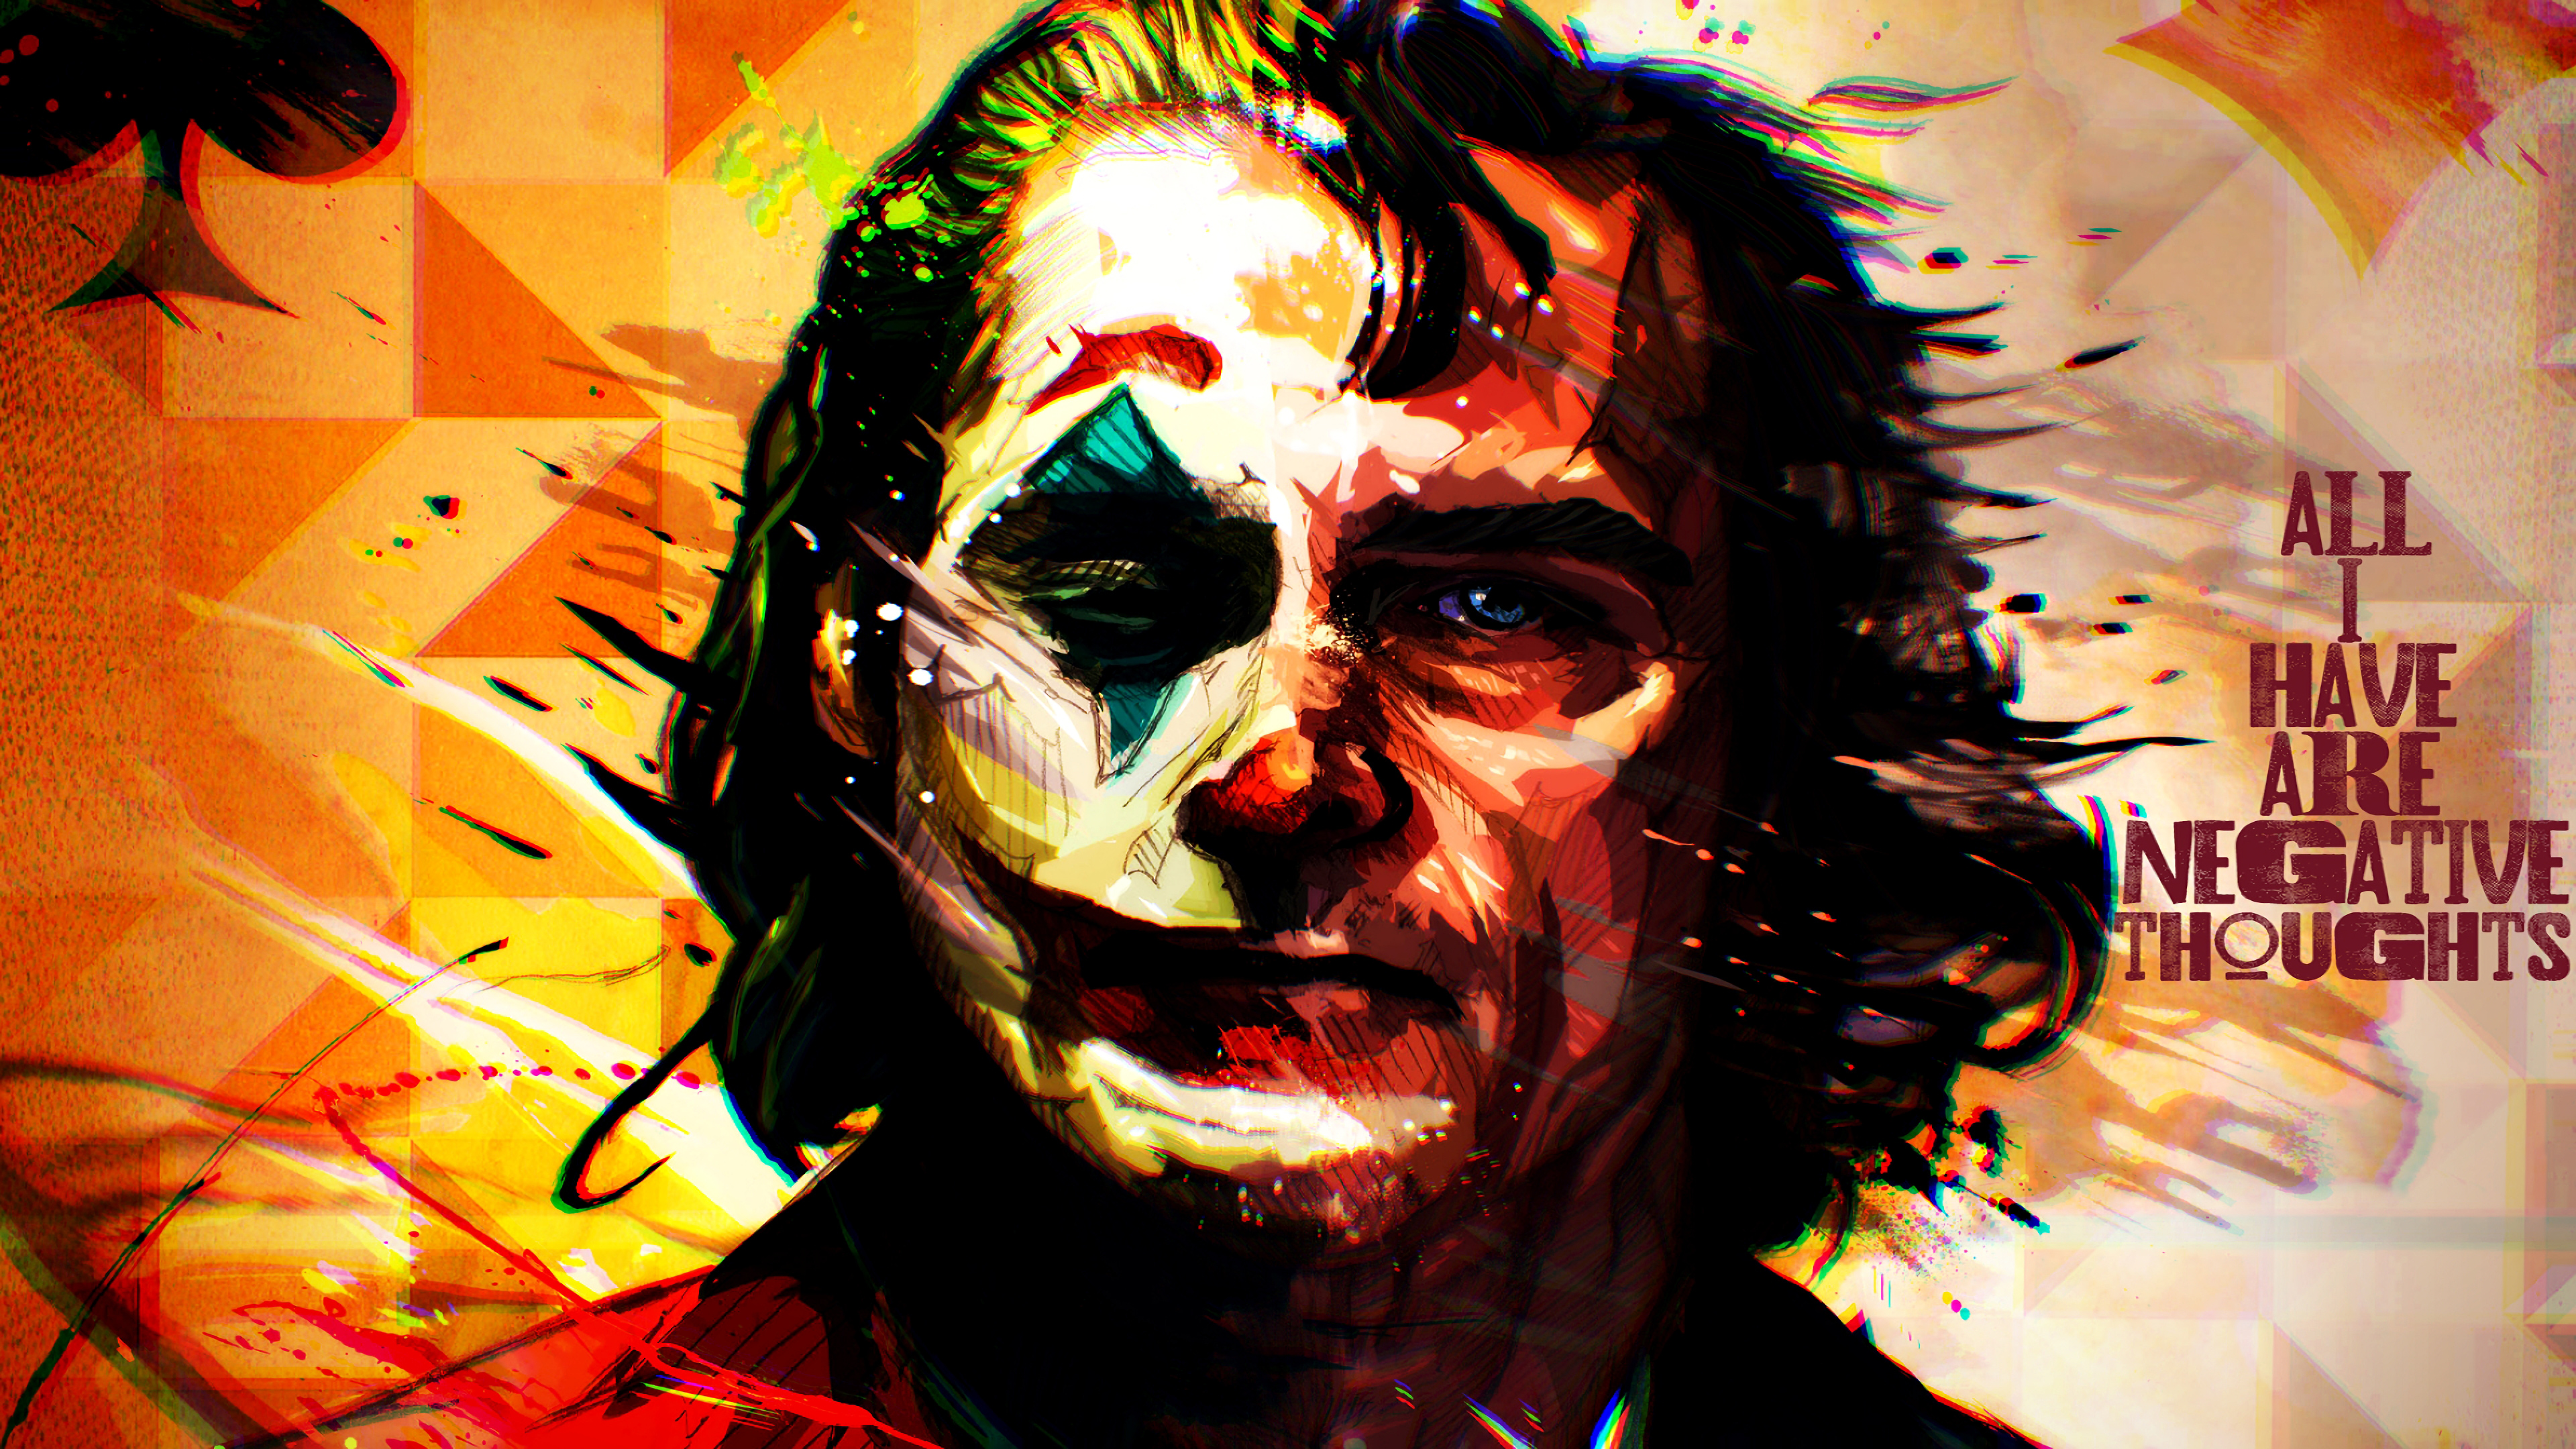 Joker All I Have Negative Thoughts 4k, HD Movies, 4k Wallpaper, Image, Background, Photo and Picture